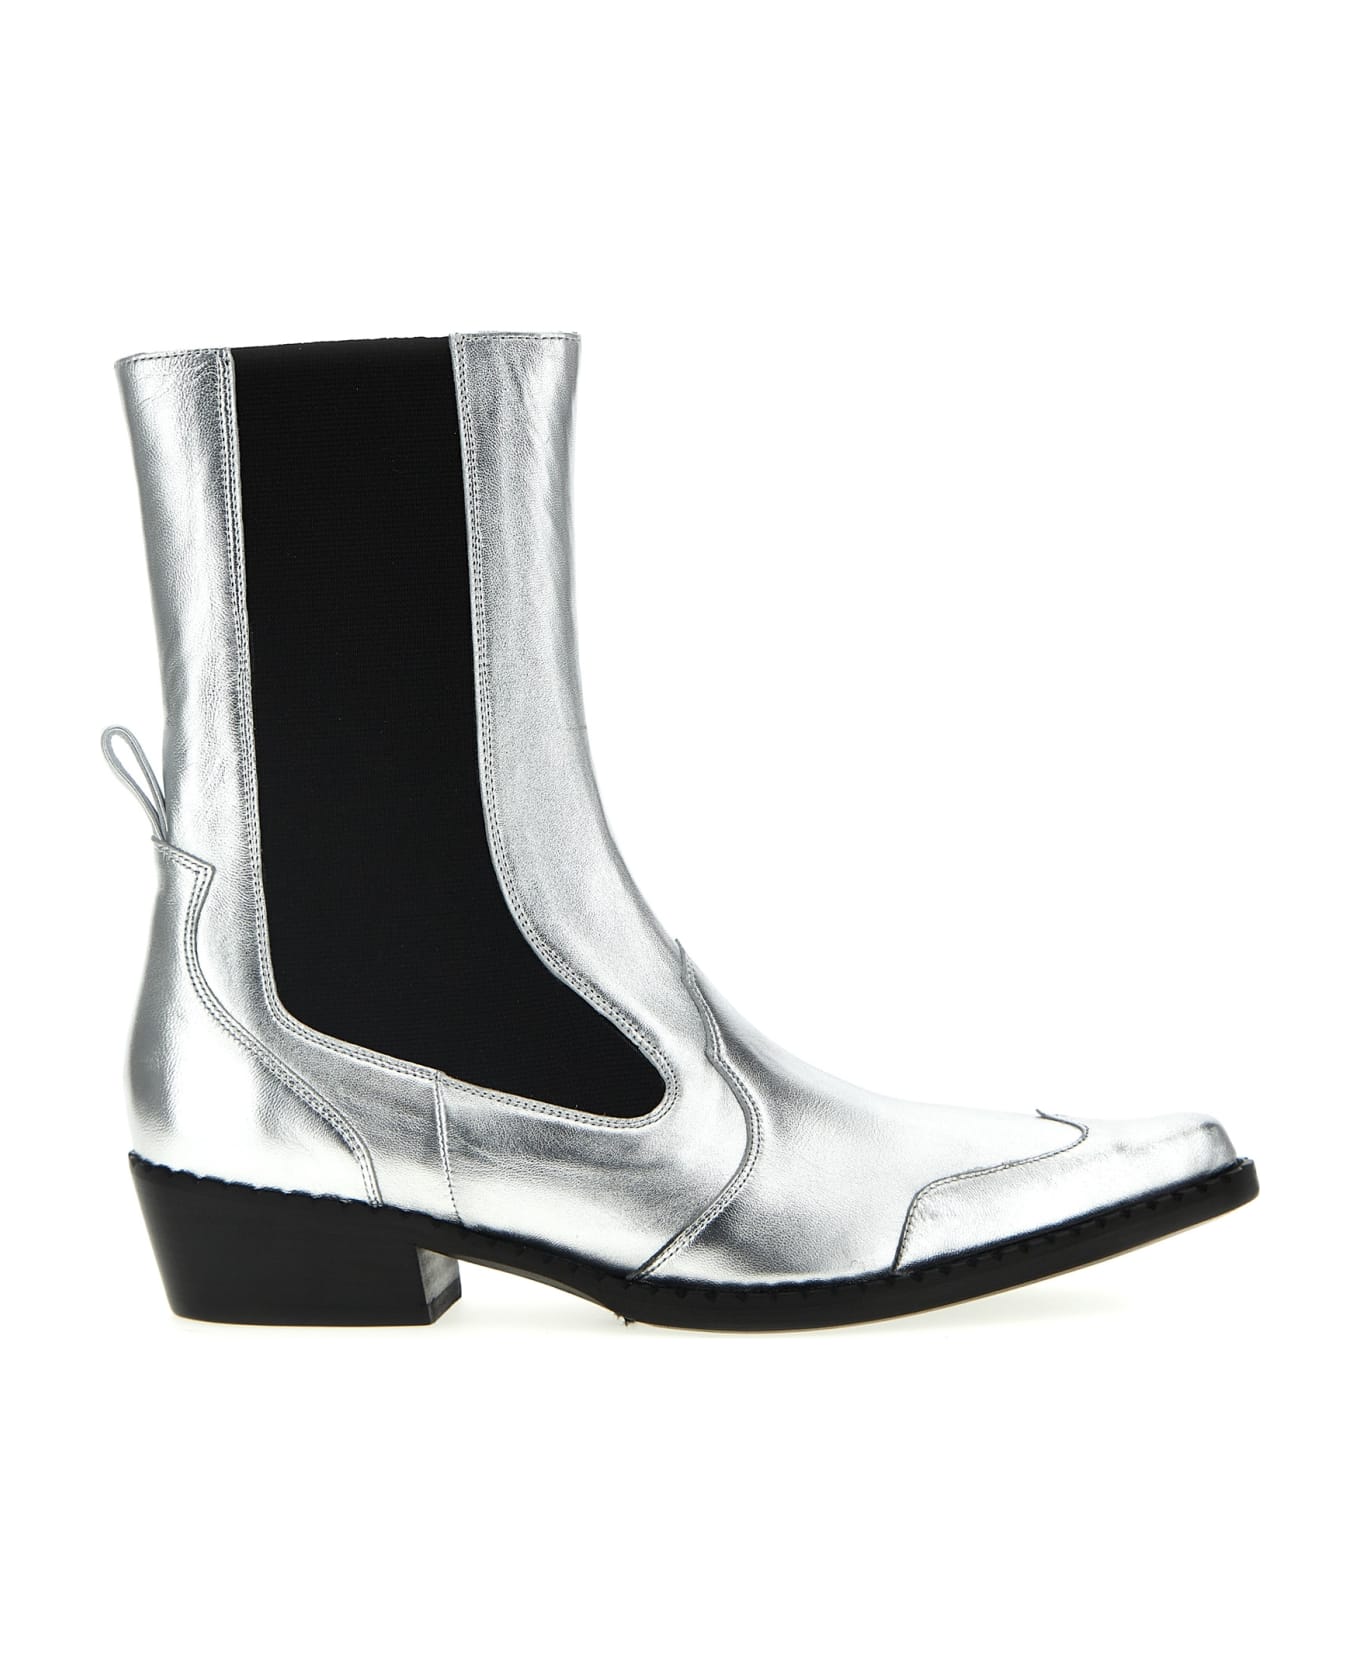 BY FAR 'otis' Ankle Boots - Silver